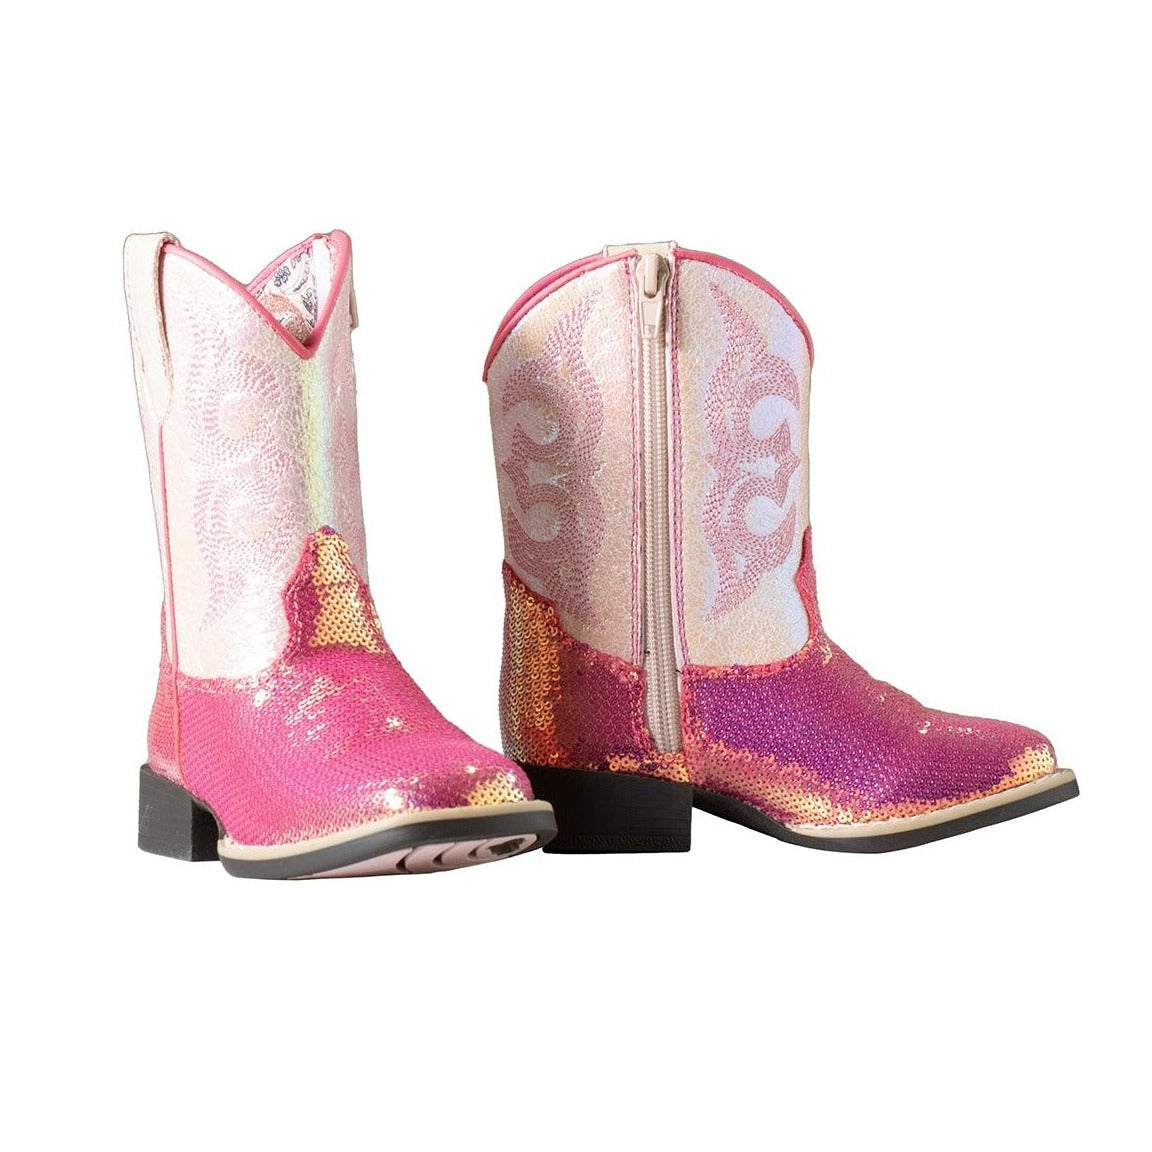 Twister Girl's Pink Krissy Toddler Boot